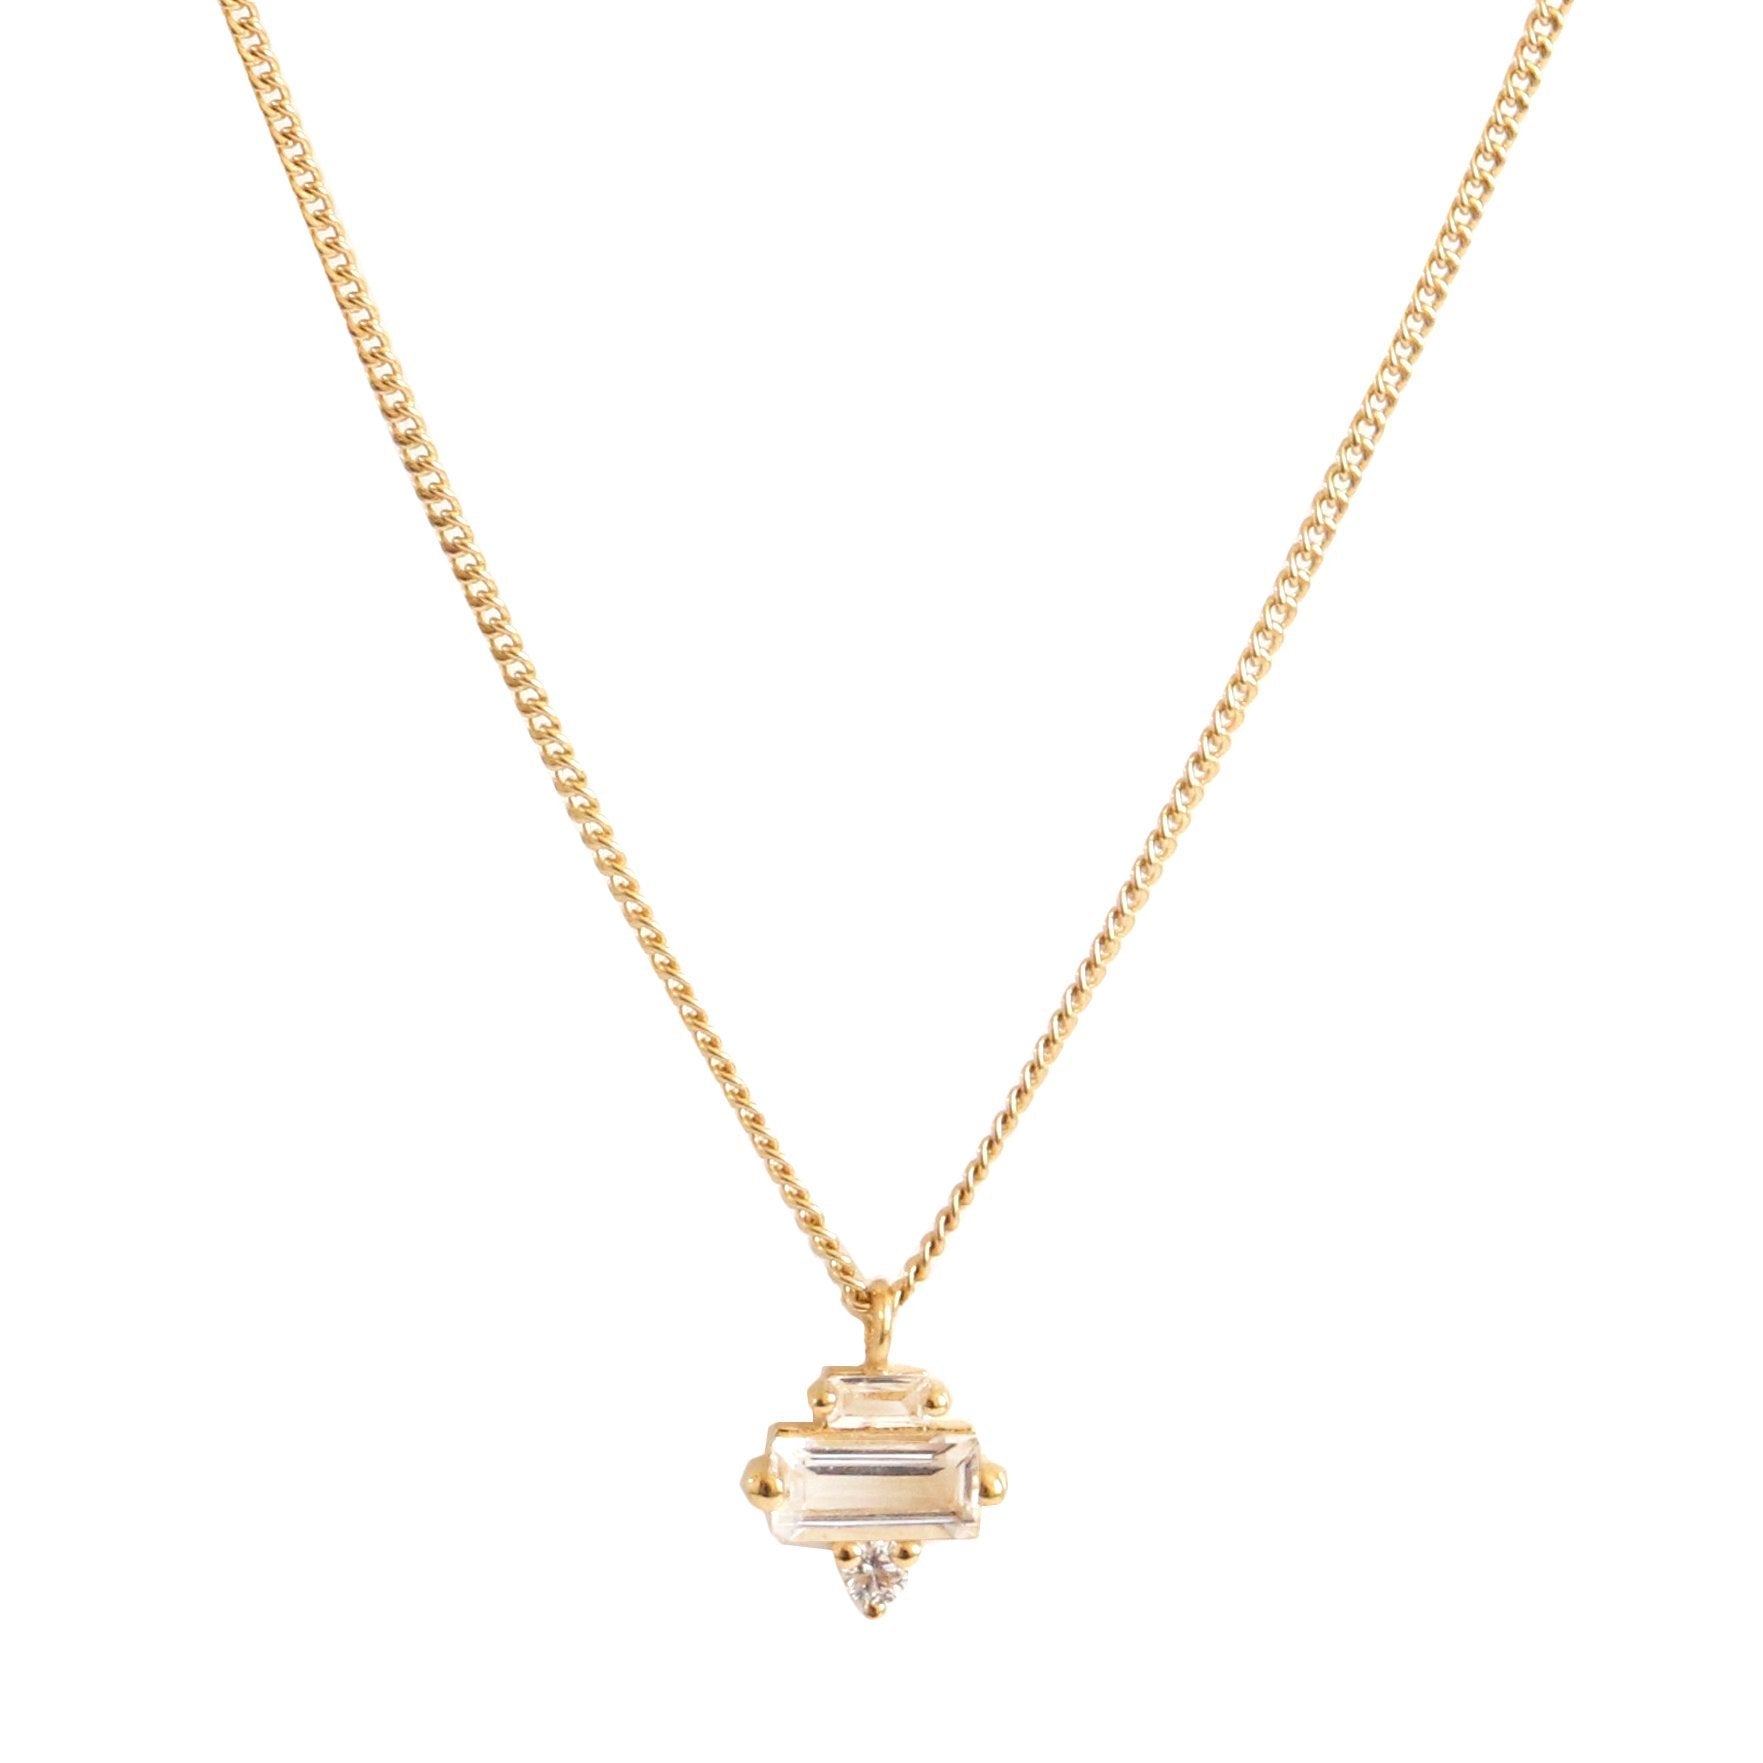 Tiny Loyal Prism Necklace - White Topaz, Cubic Zirconia & Gold - SO PRETTY CARA COTTER